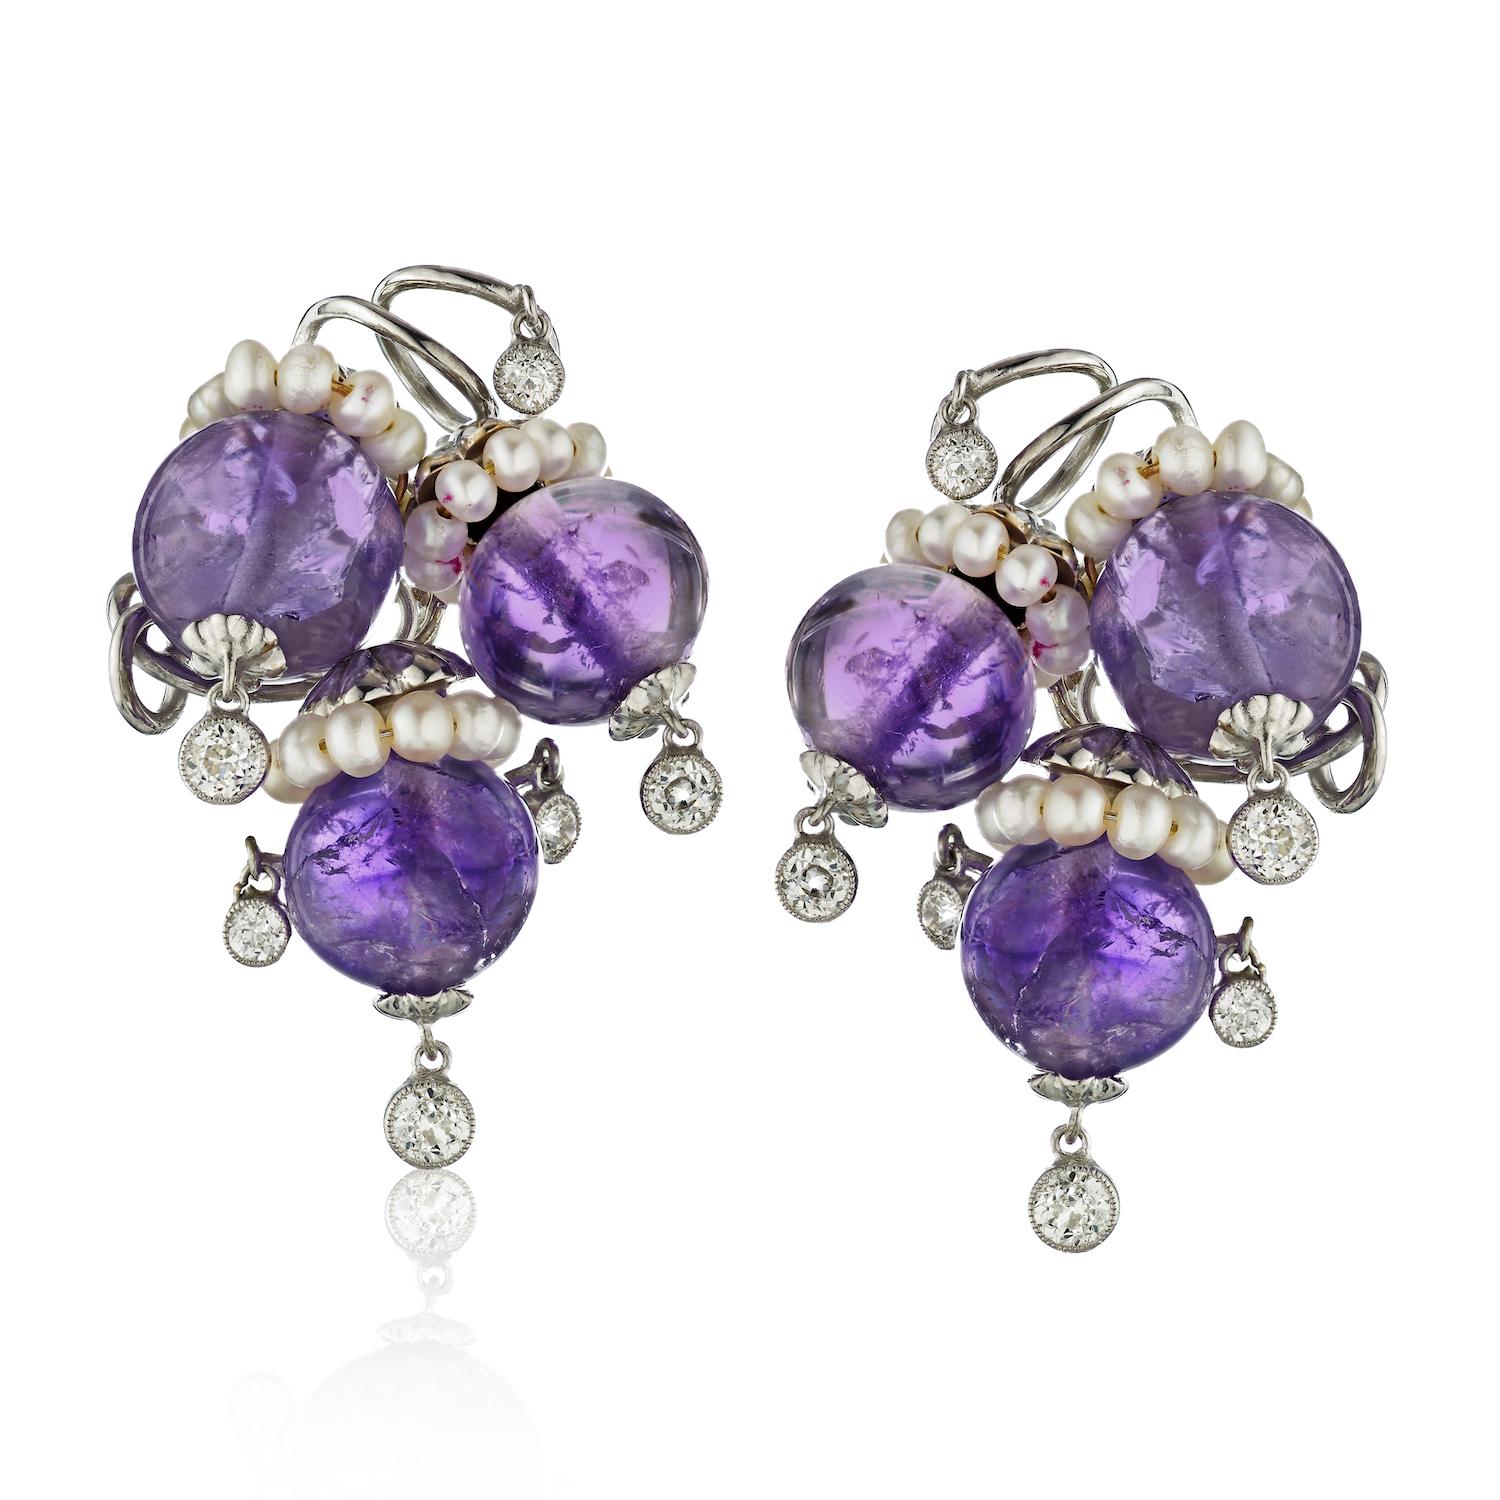 Pair of White Gold, Amethyst, Diamond and Pearl Clip-Earrings, each designed as a cluster of grapes, bezel-set old European-cut diamond fringe setting.
6 amethyst beads ap. 13.4 to 12.9 mm., 11 old European-cut diamonds ap. 1.35 cts., signed Seaman